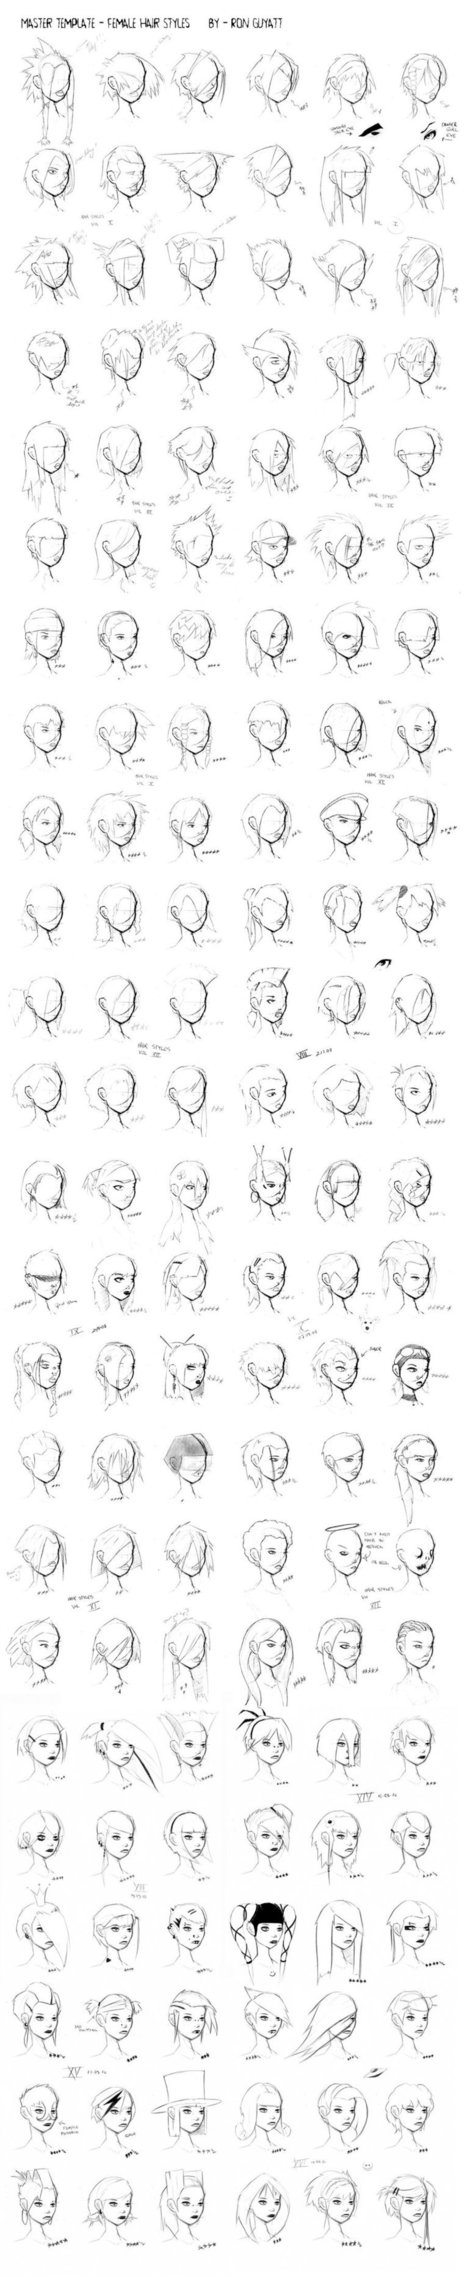 Hair Styles - Master File | Drawing References and Resources | Scoop.it